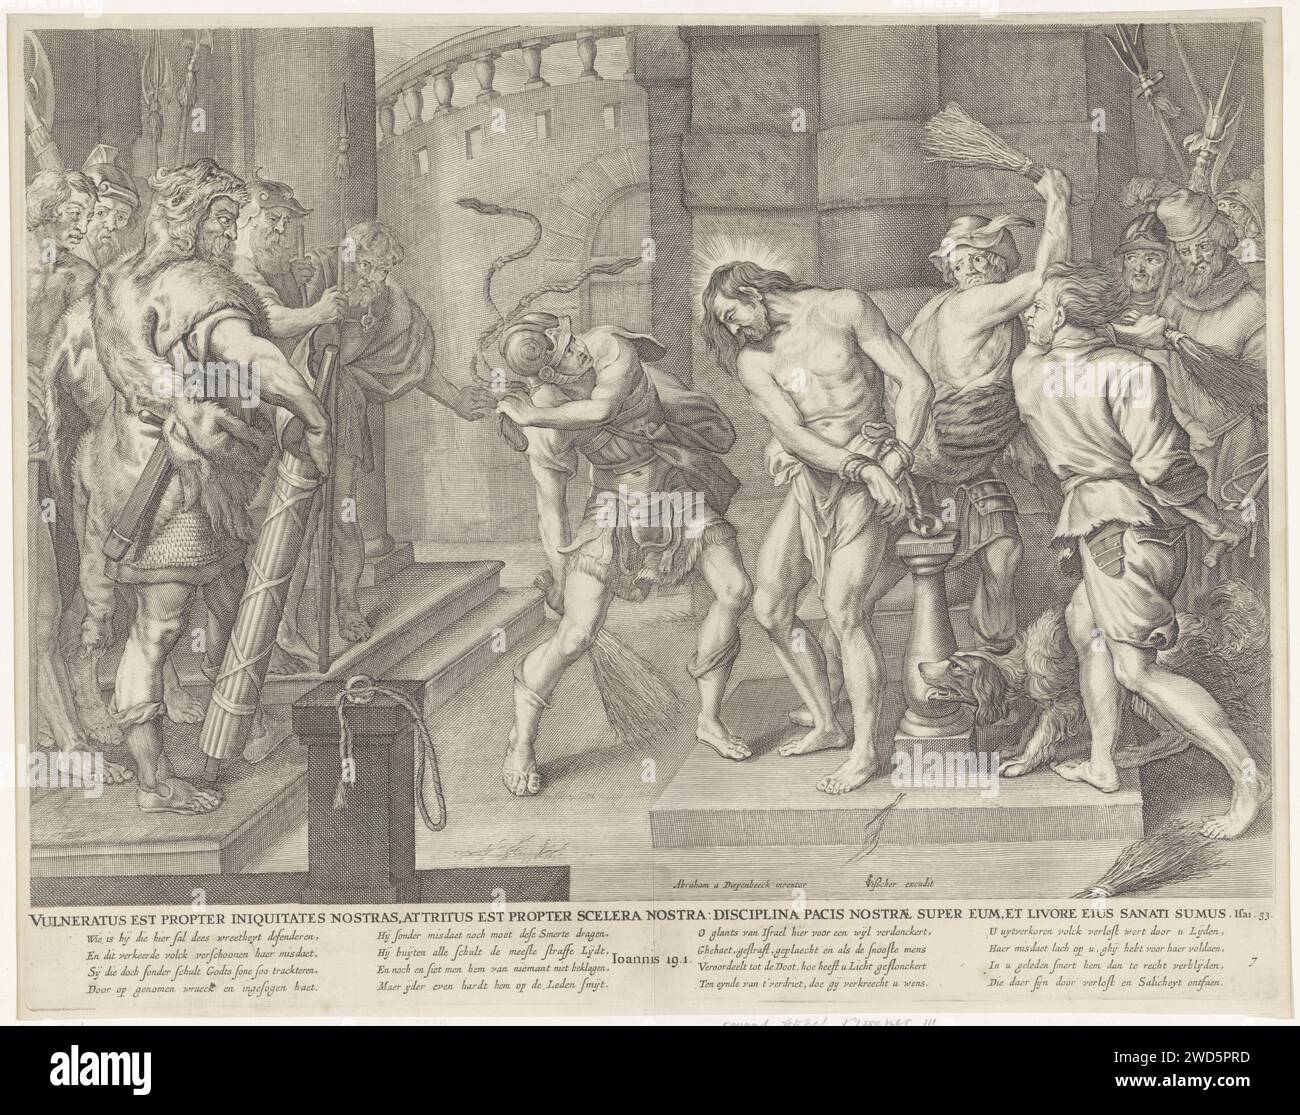 Scope, Anonymous, After Pieter de Bailliu (i), After Abraham van Diepenbeeck, After Erasmus Quellinus (ii), c. 1645 - 1702 print Christ, tied up to the scenel, is beaten by three men with rod and rope. Men watch left and right. Under the show the title in Latin, four four -line verses in Dutch and a reference to the Bible text in Isa. 53 and Joh. 19: 1. Amsterdam paper engraving flagellation by soldiers, Christ usually tied to a column (Matthew 27:26; Mark 15:15; John 19:1) Stock Photo